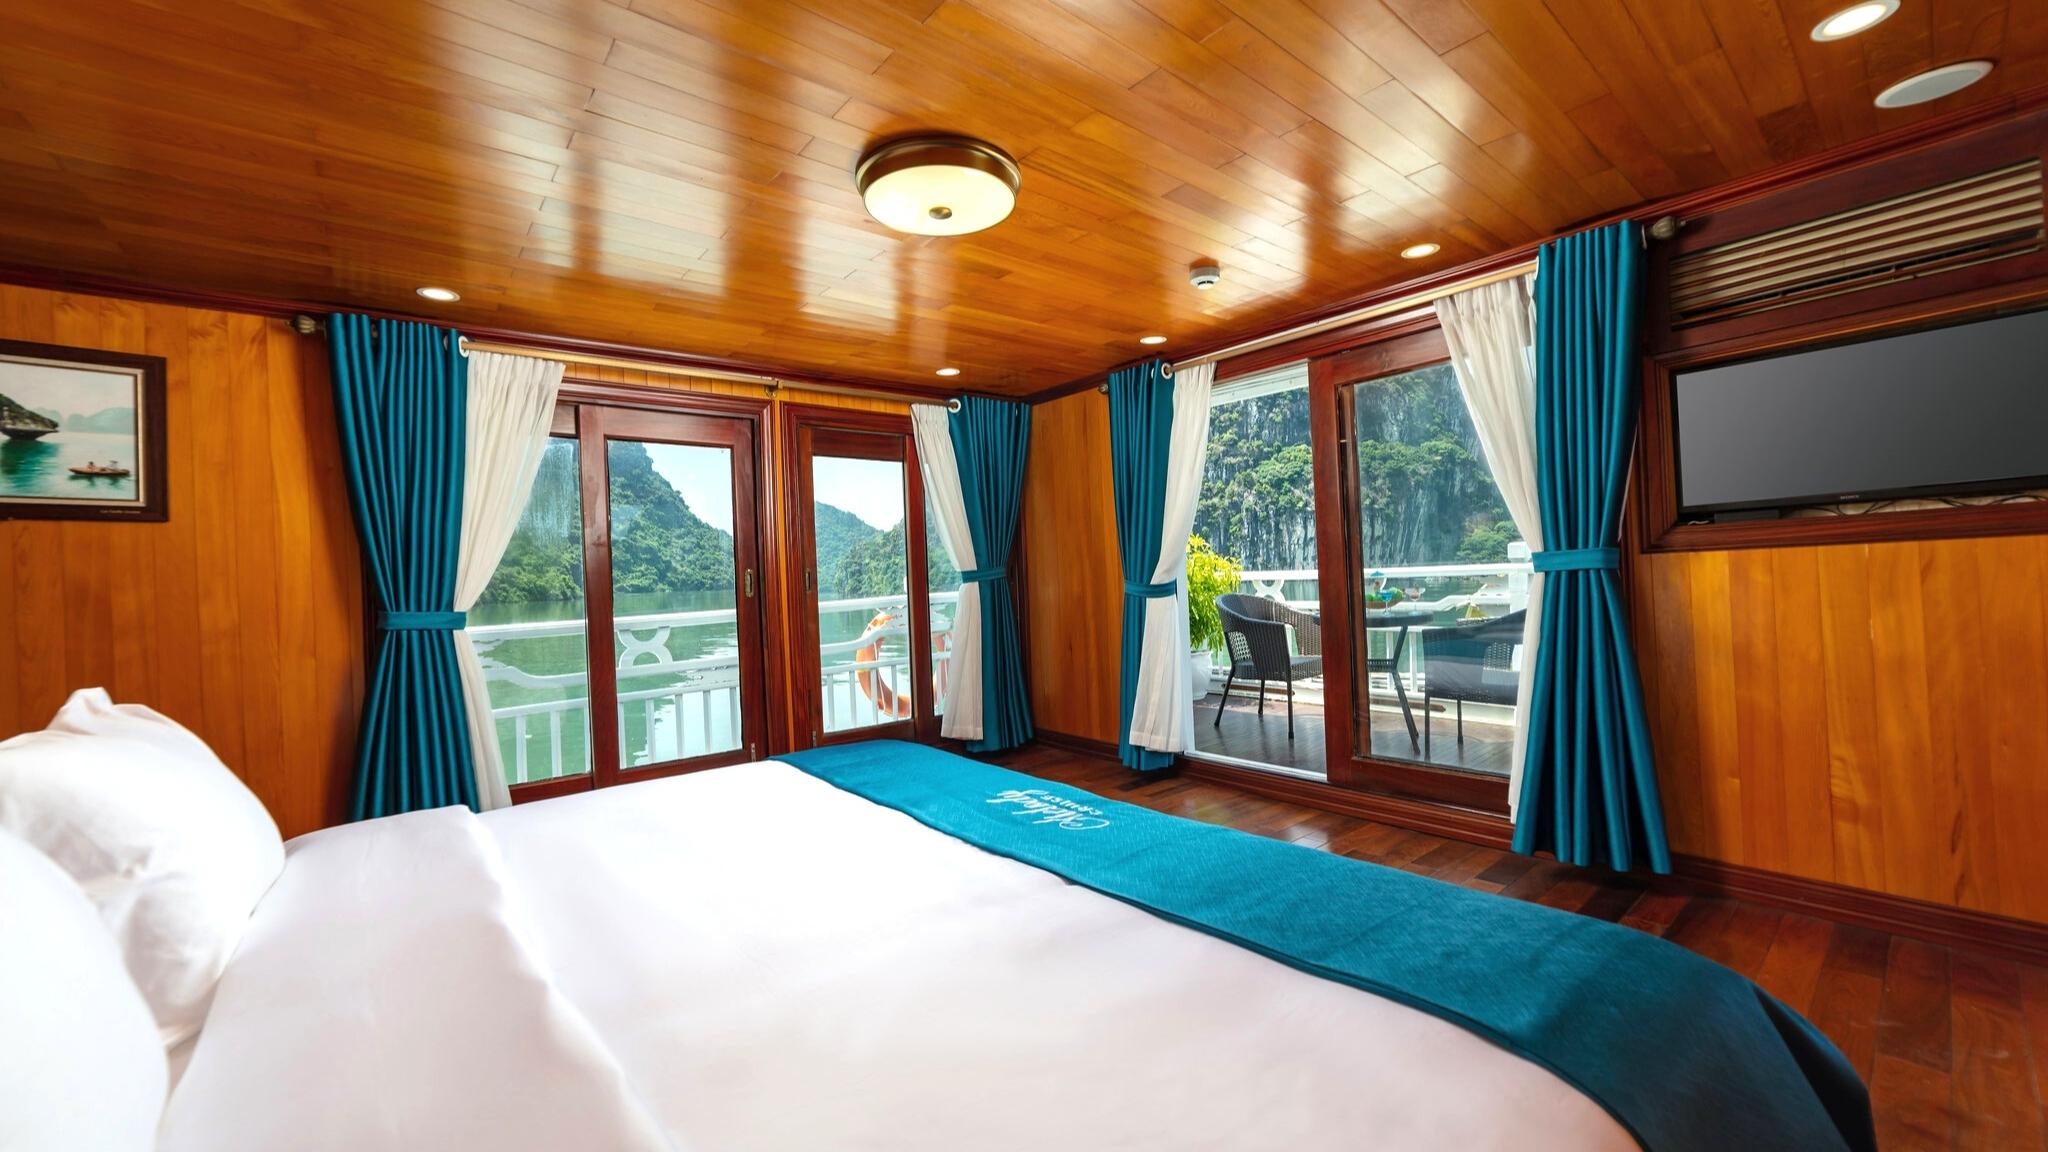 Spacious room features private balcony